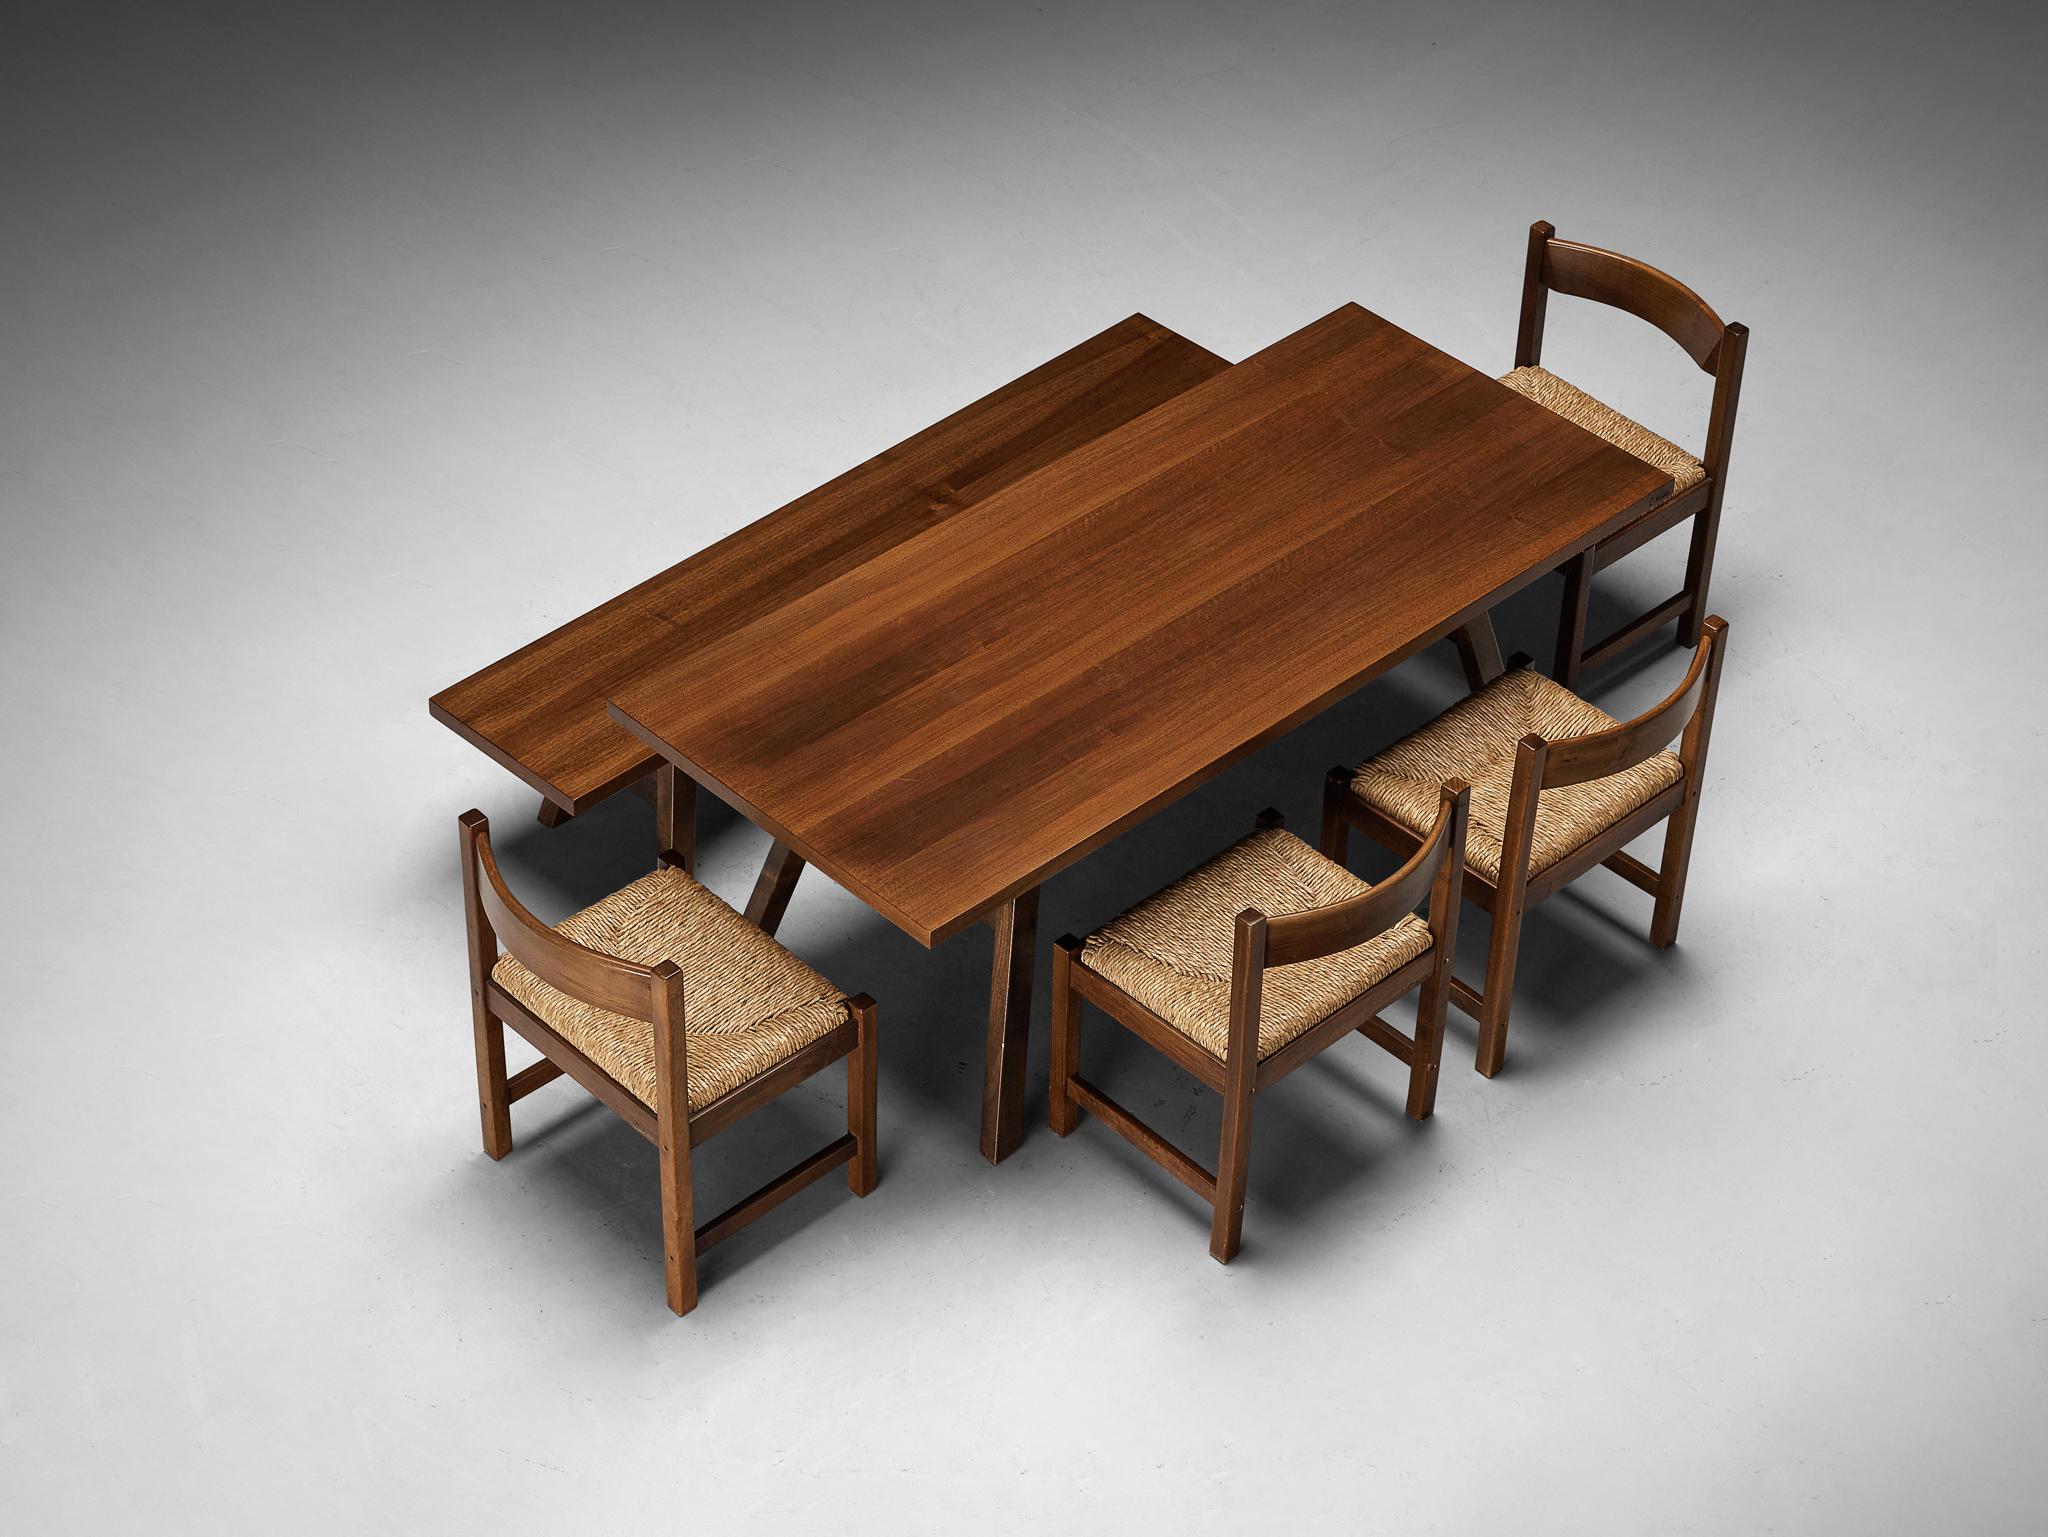 Giovanni Michelucci for Poltronova, ´Torbecchia´ dining room set; table, bench and four chairs, walnut, cane, Italy, circa 1964.

This dining room set contains one table, a bench and, four chairs. This set, with its solid and grand appearance, is